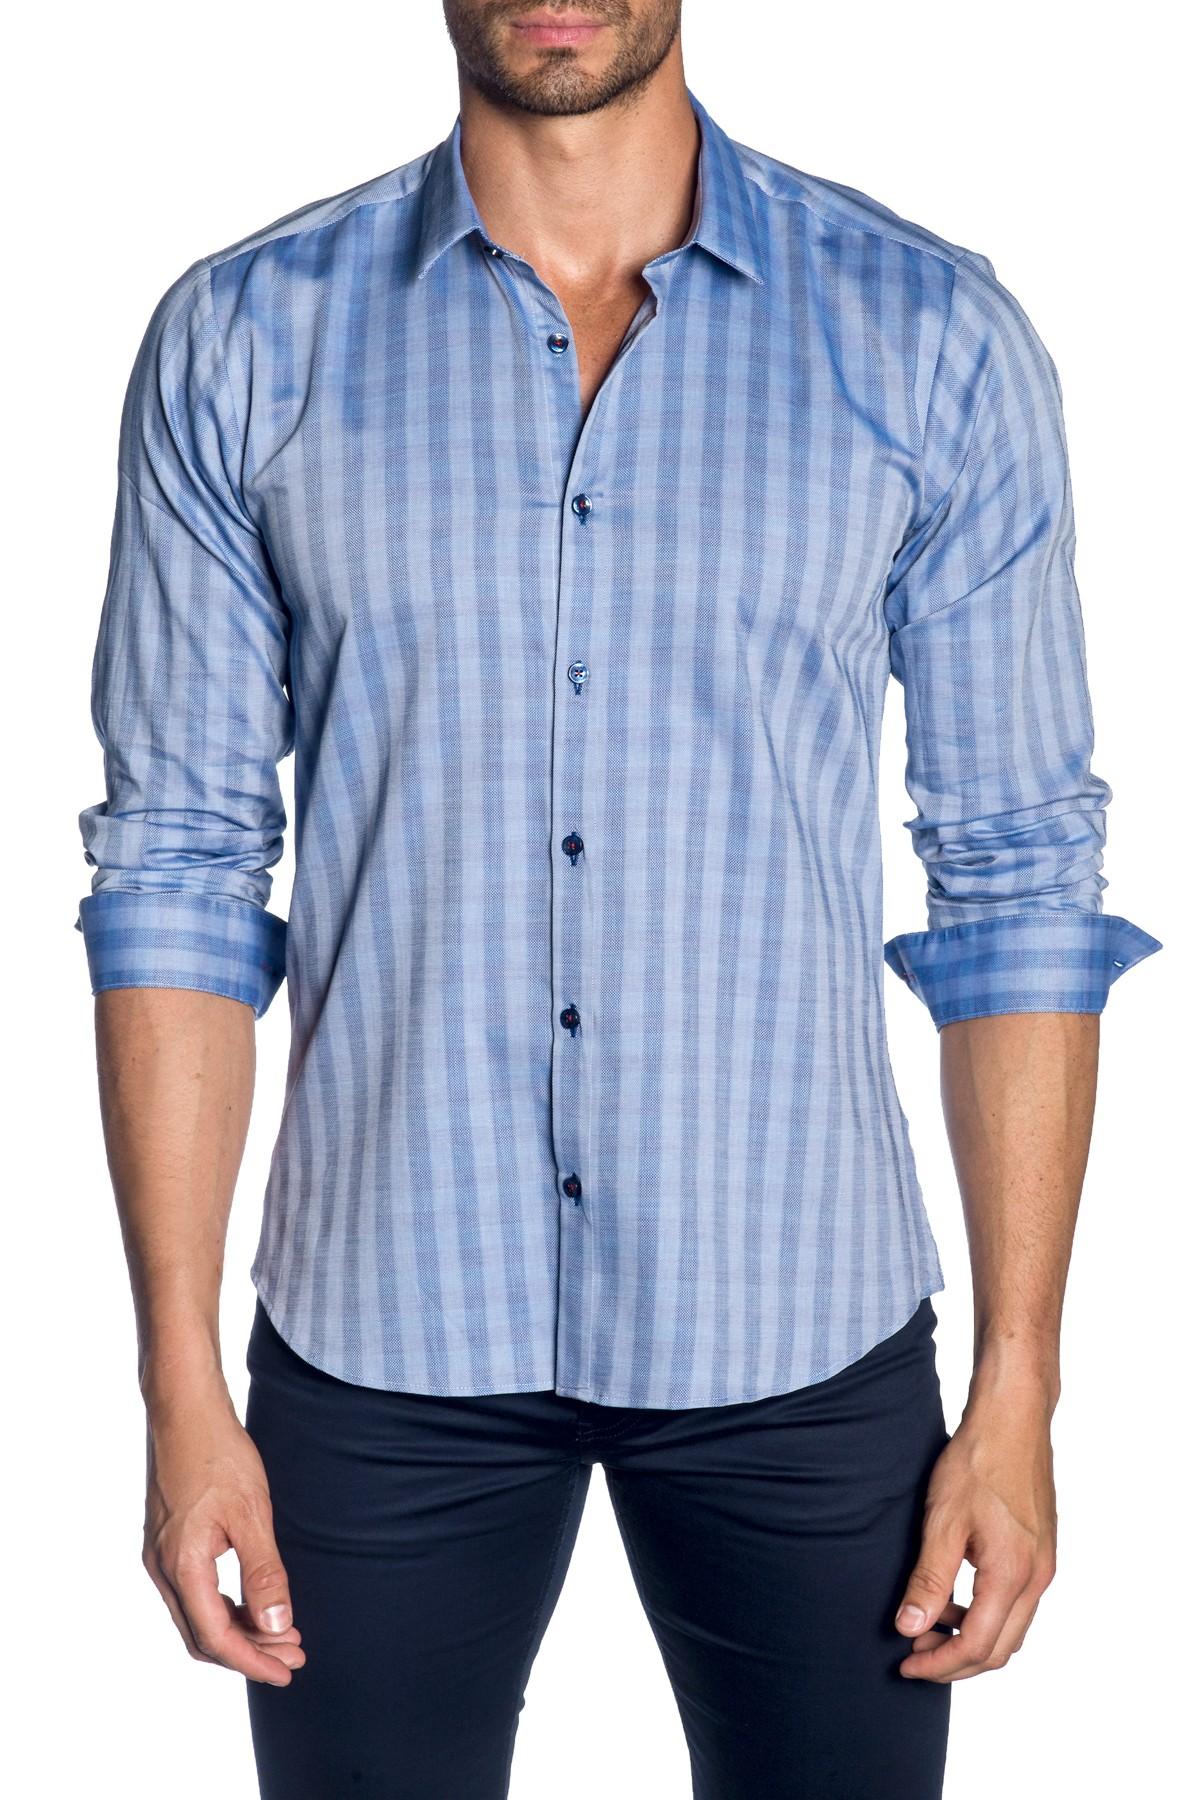 Jared Lang Striped Shirt in French Blue Stripe (Blue) for Men - Lyst